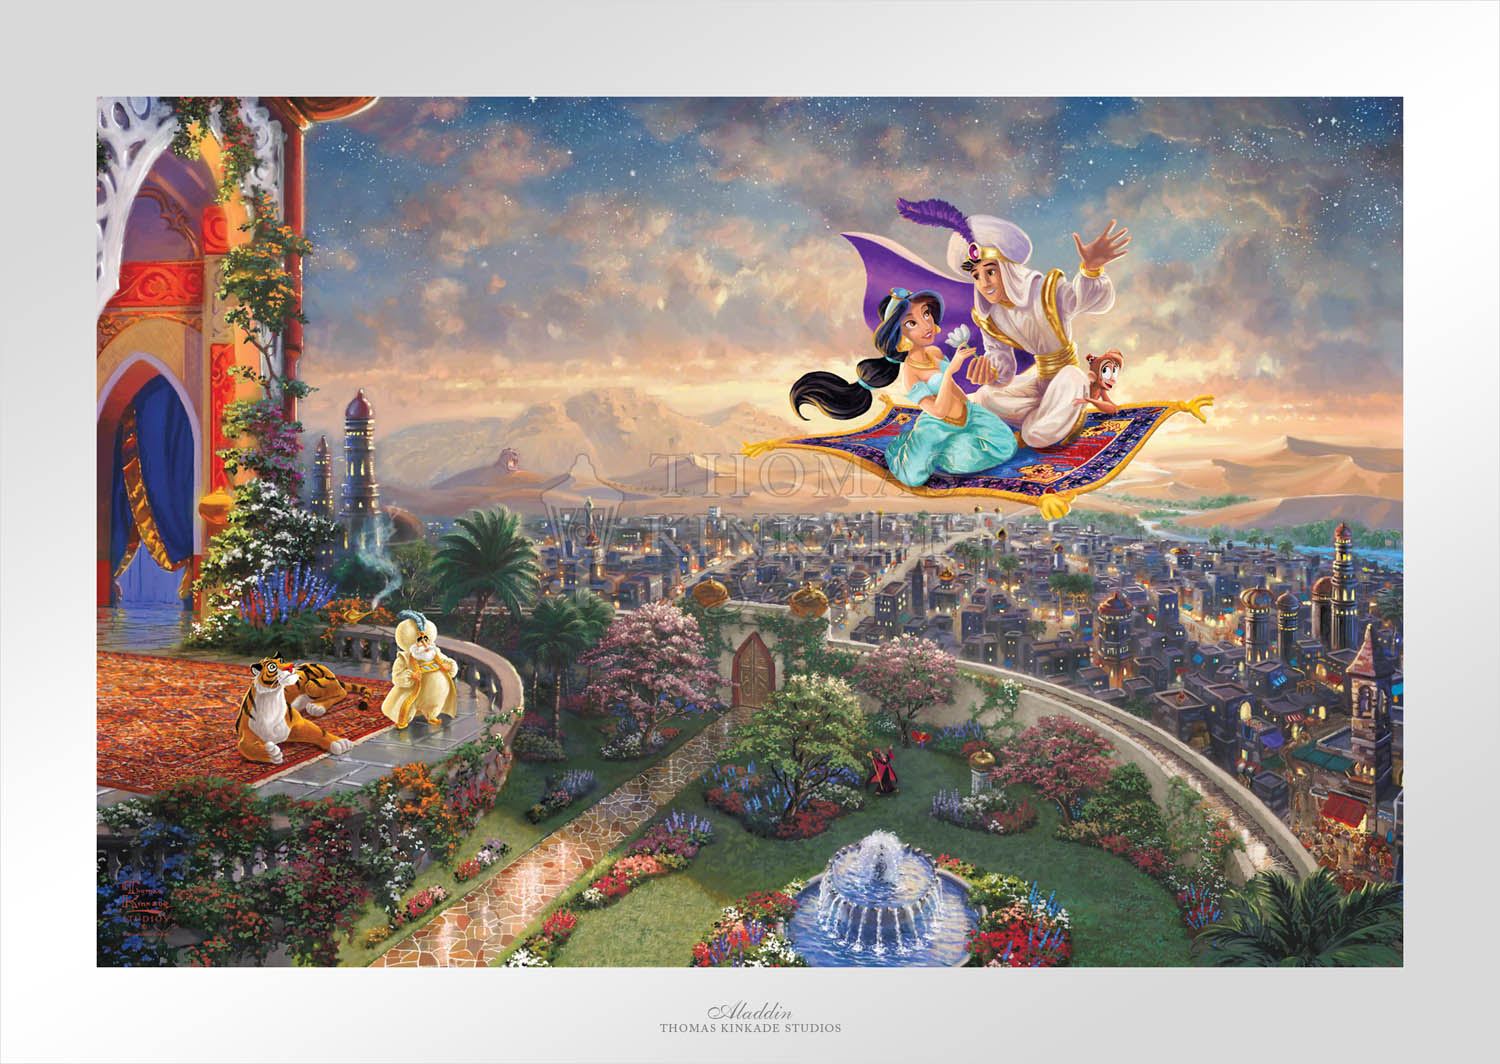 Aladdin and Jasmine soar above Agrabah and the neighboring kingdom on a magic carpet ride, as the Sultan of Agrabah (her father) and her overprotective pet tiger Rajah watch - unframed